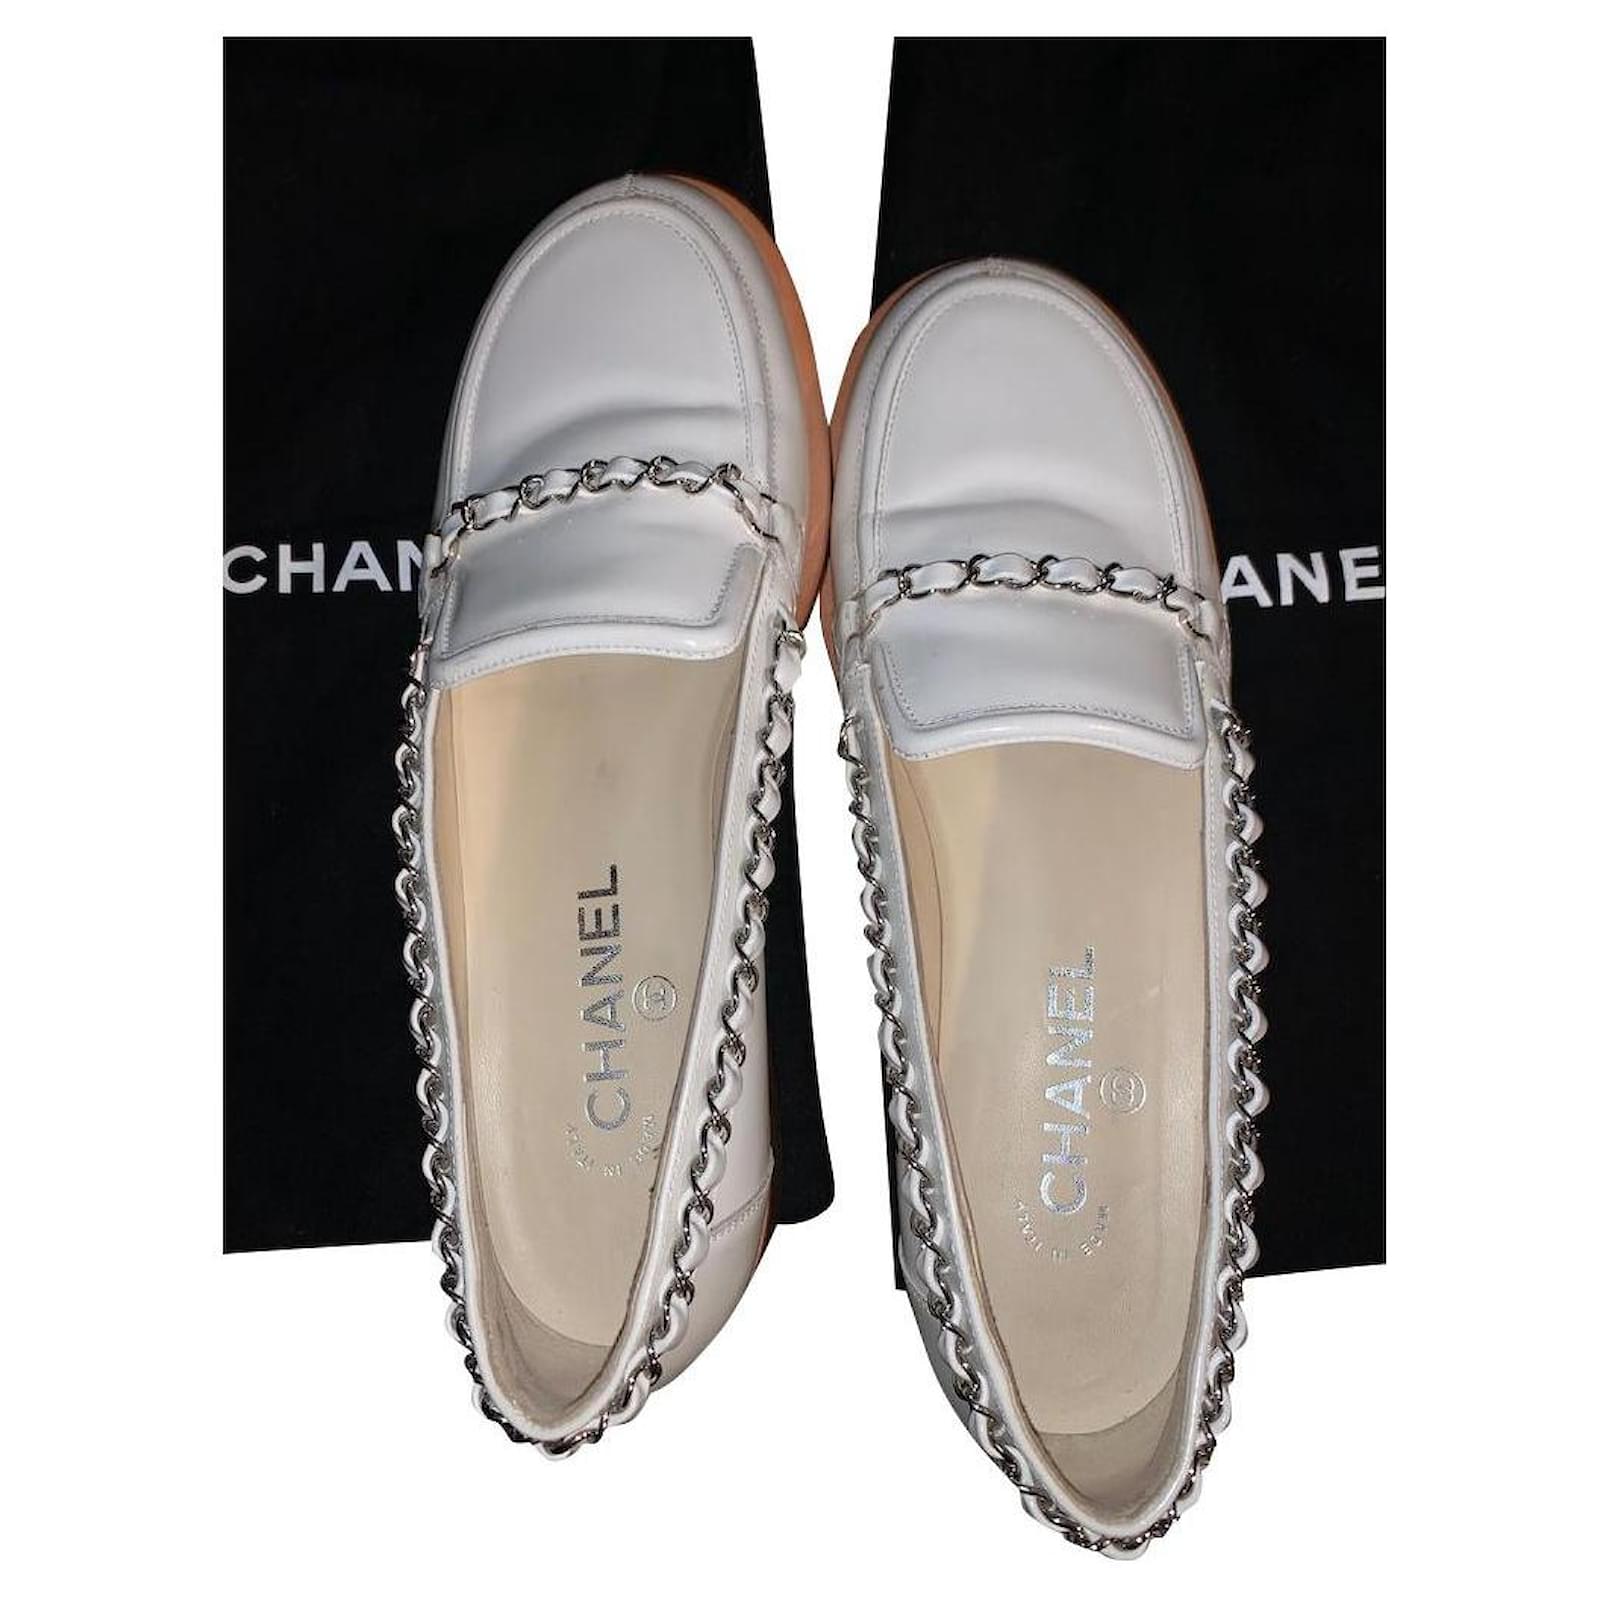 Chanel Black/White Patent Leather CC Chain Link Slip On Loafers Size 39  Chanel